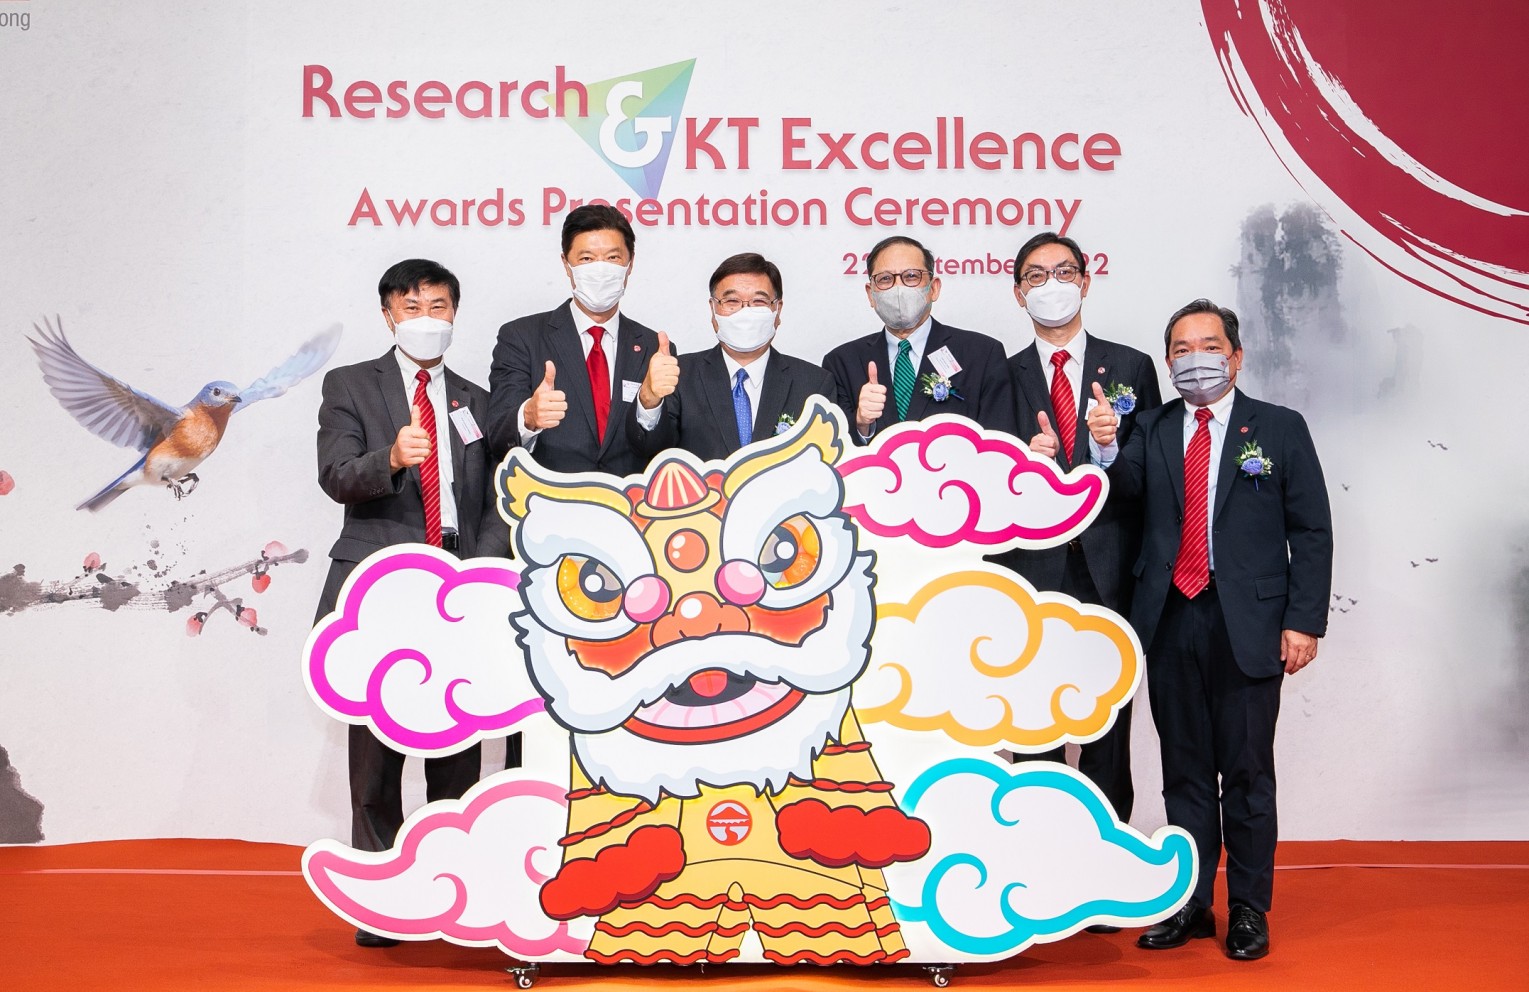 Officiating guests kick off the Research & KT Excellence Awards Presentation Ceremony 2022 cum Exhibition of Knowledge Transfer/Entrepreneurship Projects.